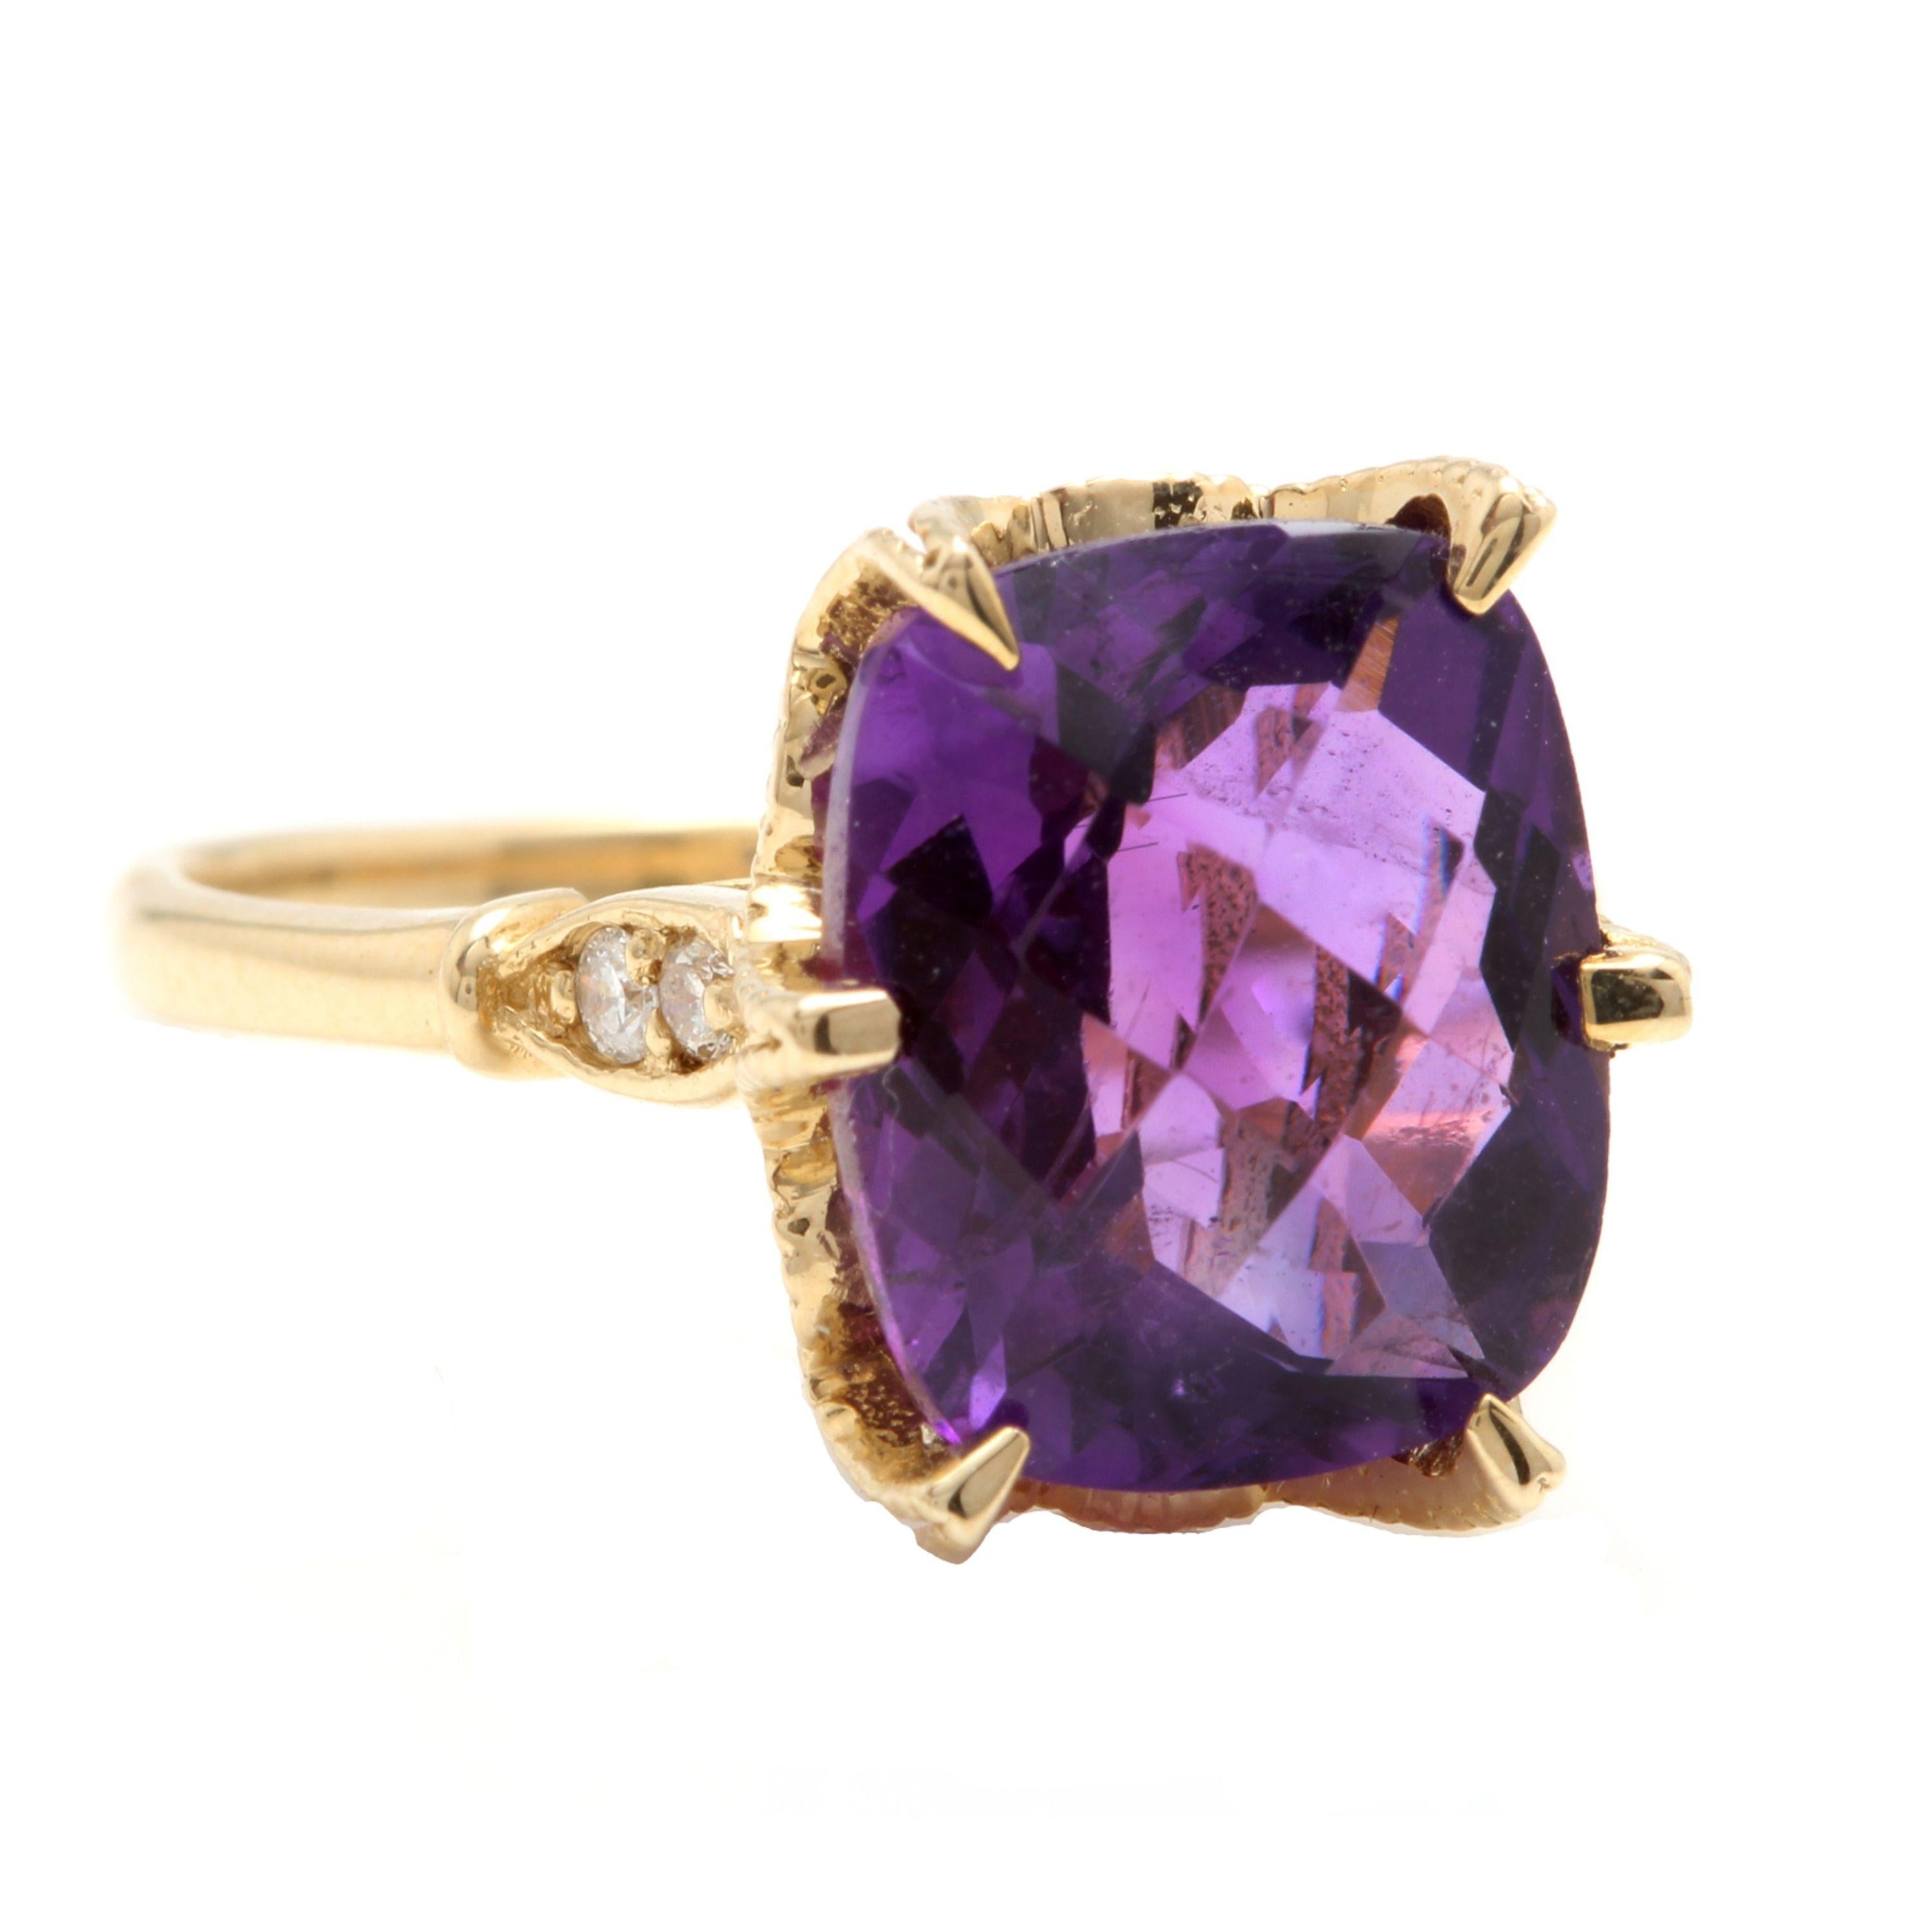 4.08 Carats Natural Amethyst and Diamond 14K Solid Yellow Gold Ring

Total Natural Cushion Shaped Amethyst Weights: Approx.  4.00 Carats

Amethyst Measures: Approx. 11 x 9mm

Natural Round Diamonds Weight: Approx.  0.08 Carats (color G-H / Clarity